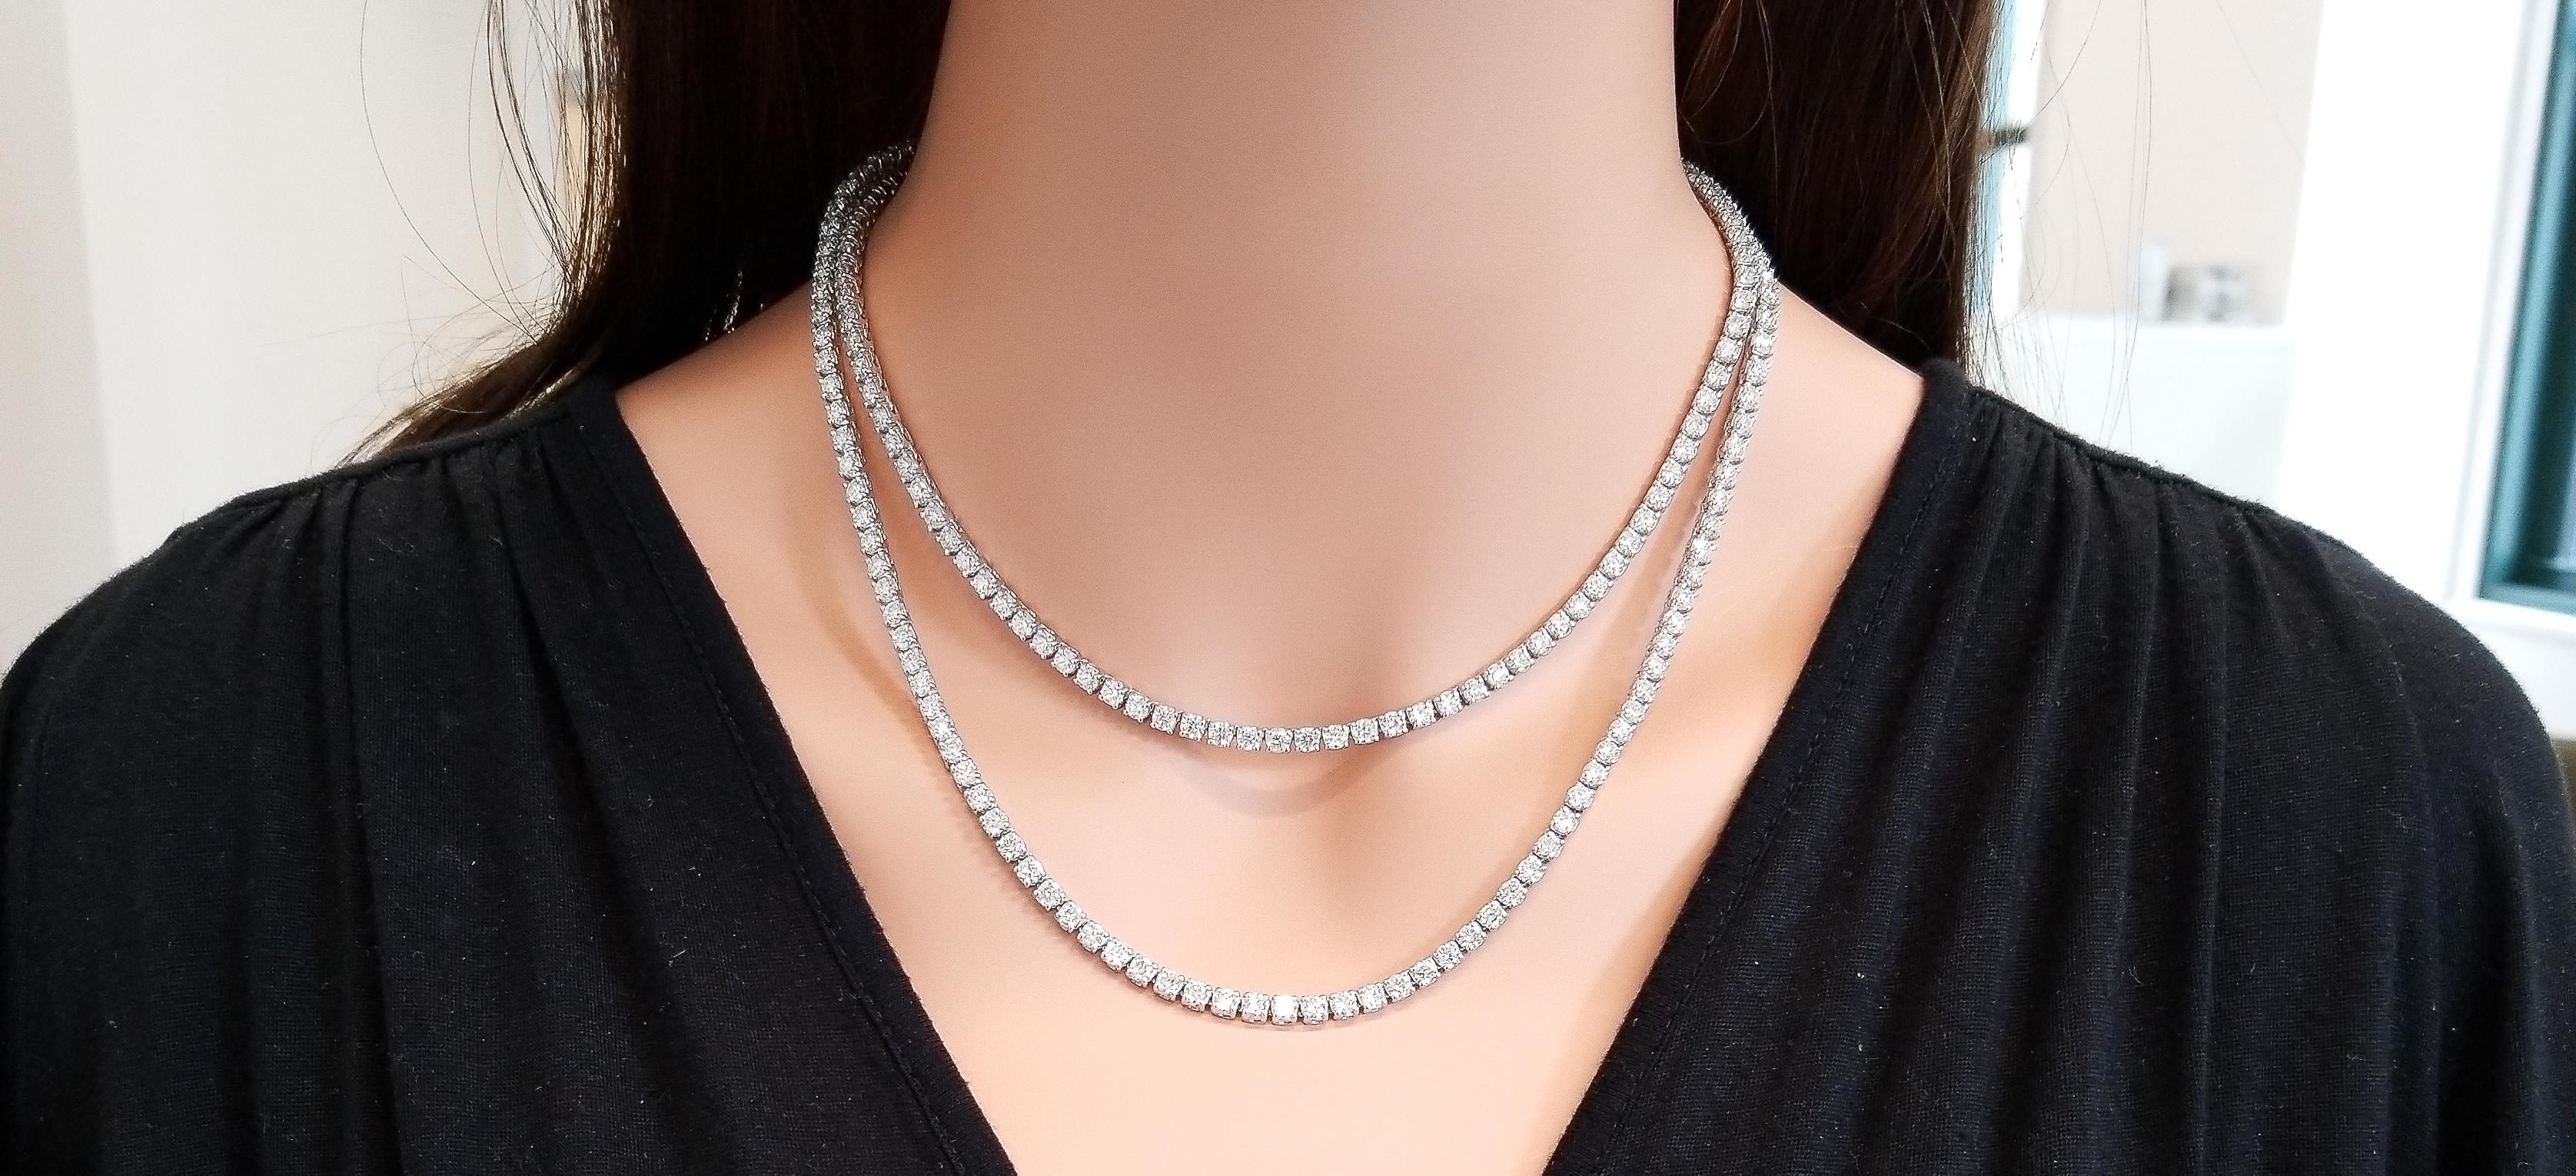 This is a tennis necklace that deserves attention. It's long, chic, and timeless. Show-stopping in fire and brilliance, this incredible tennis necklace features 223 sparkling round brilliant cut diamonds that are skillfully prong set from end to end